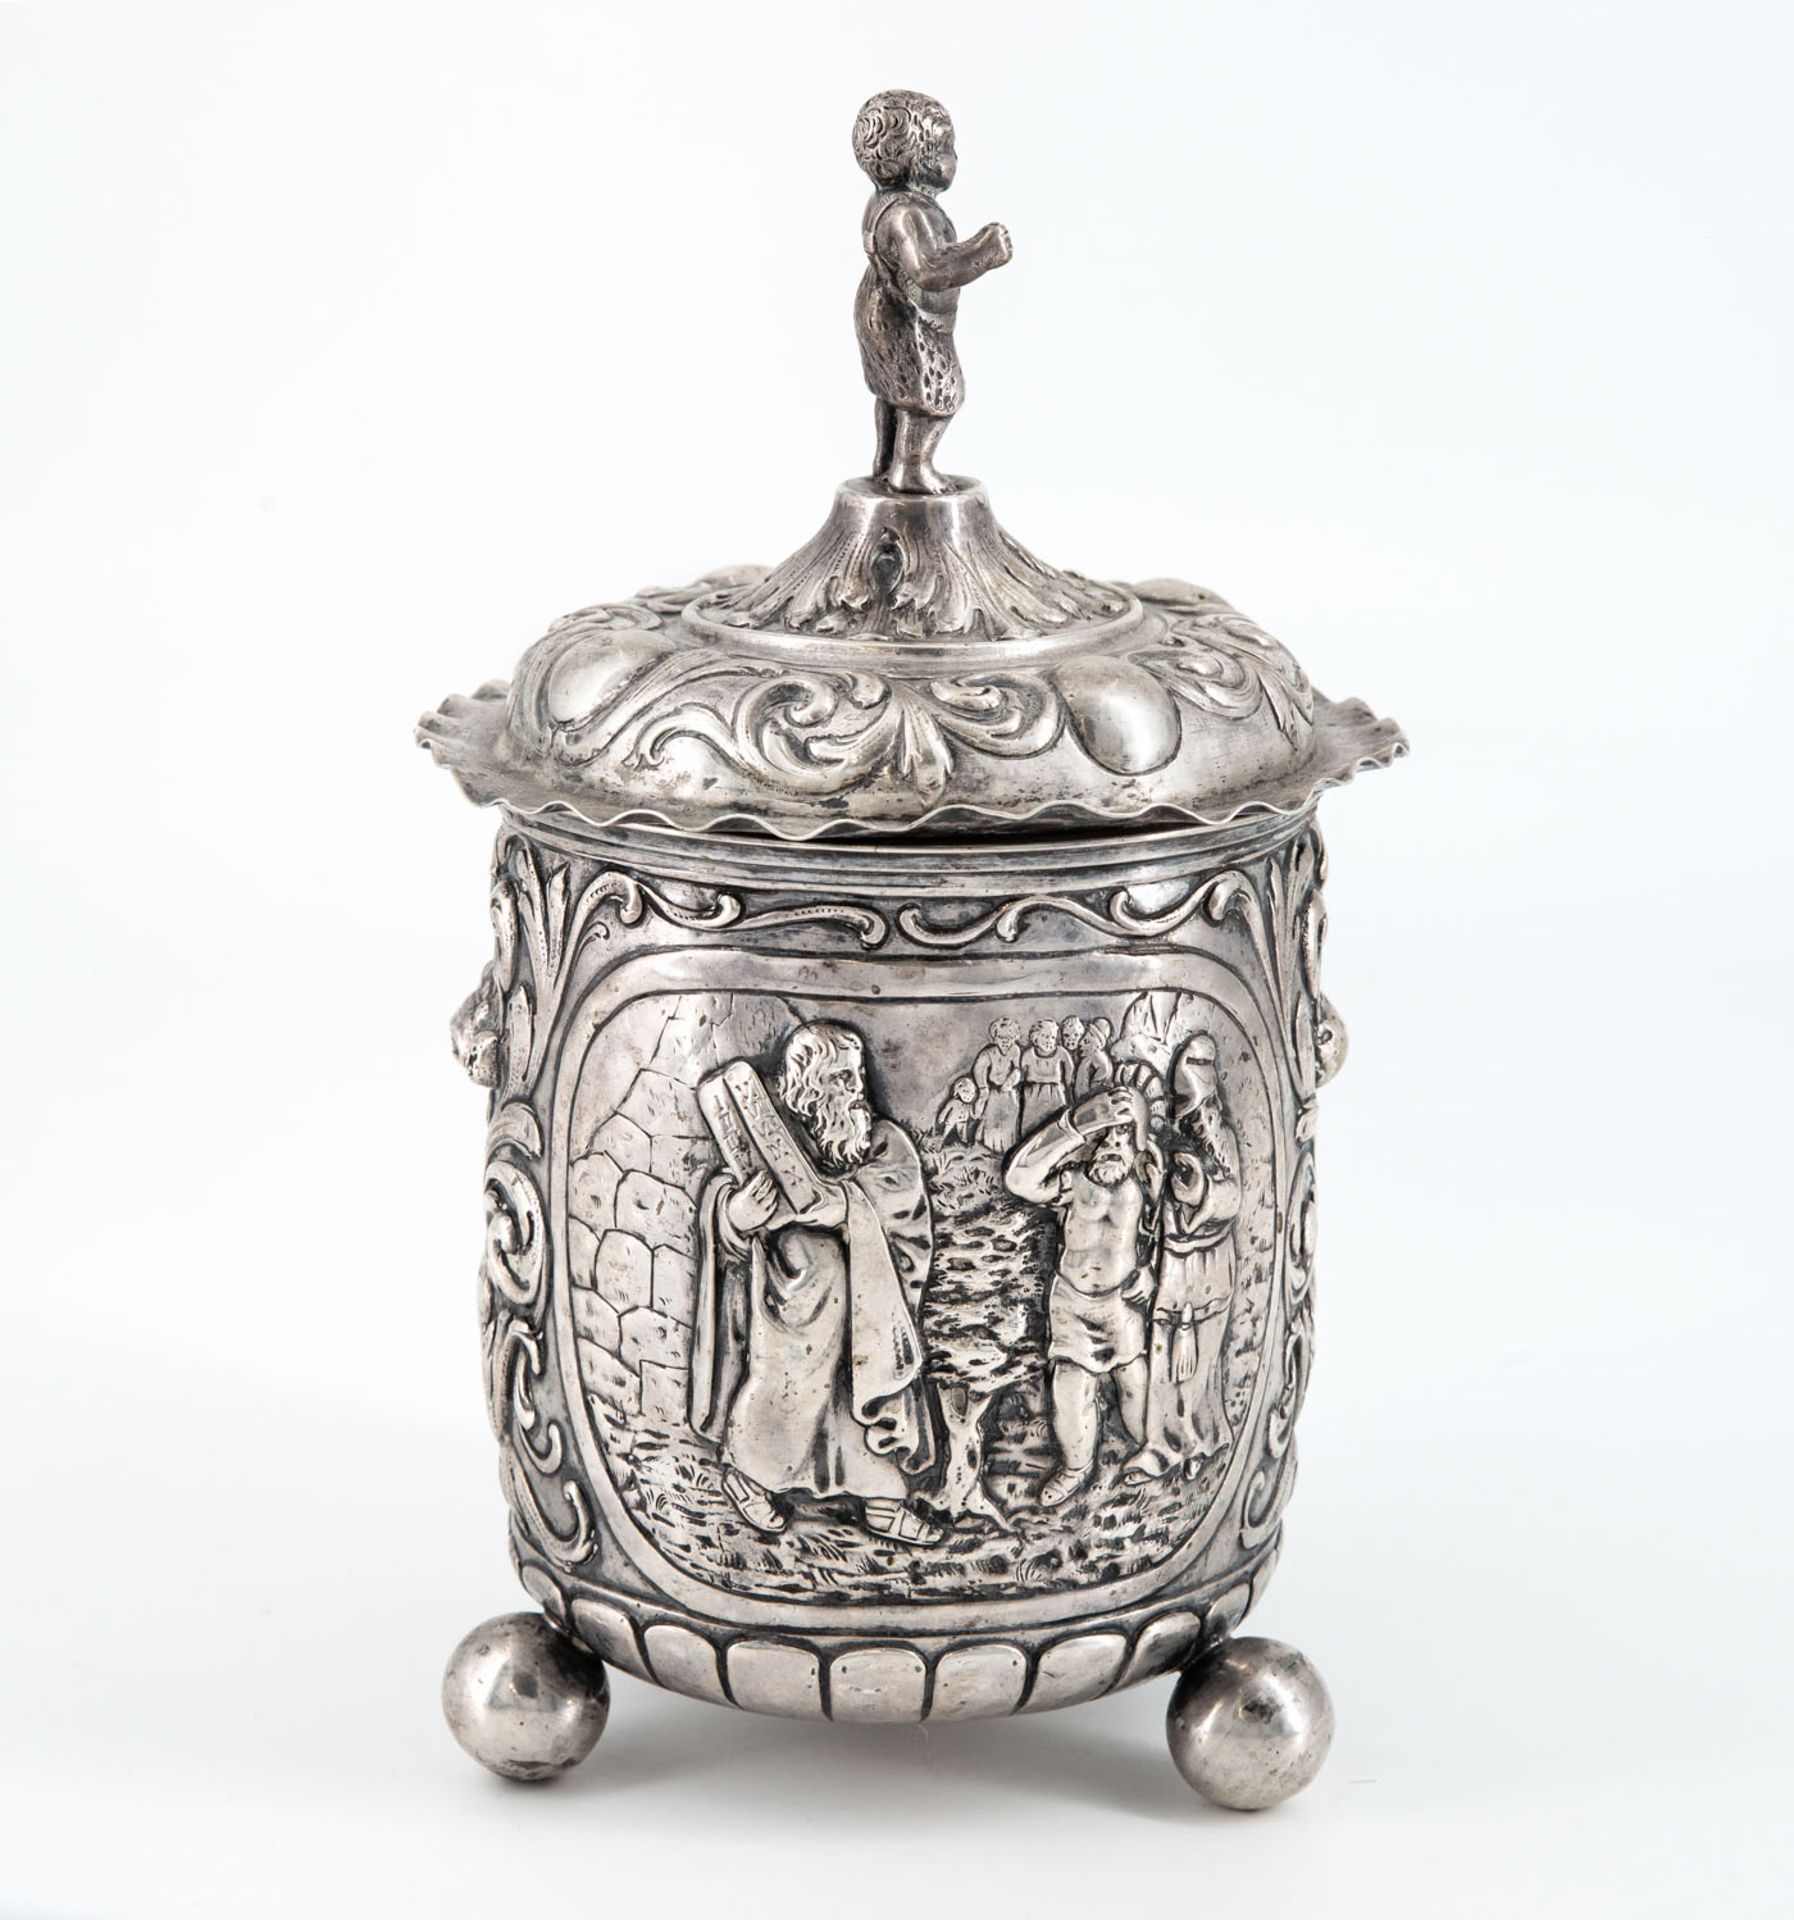 A Fine Silver Lidded Becher, Prob. Netherlands, 17/18th Century - Image 3 of 5